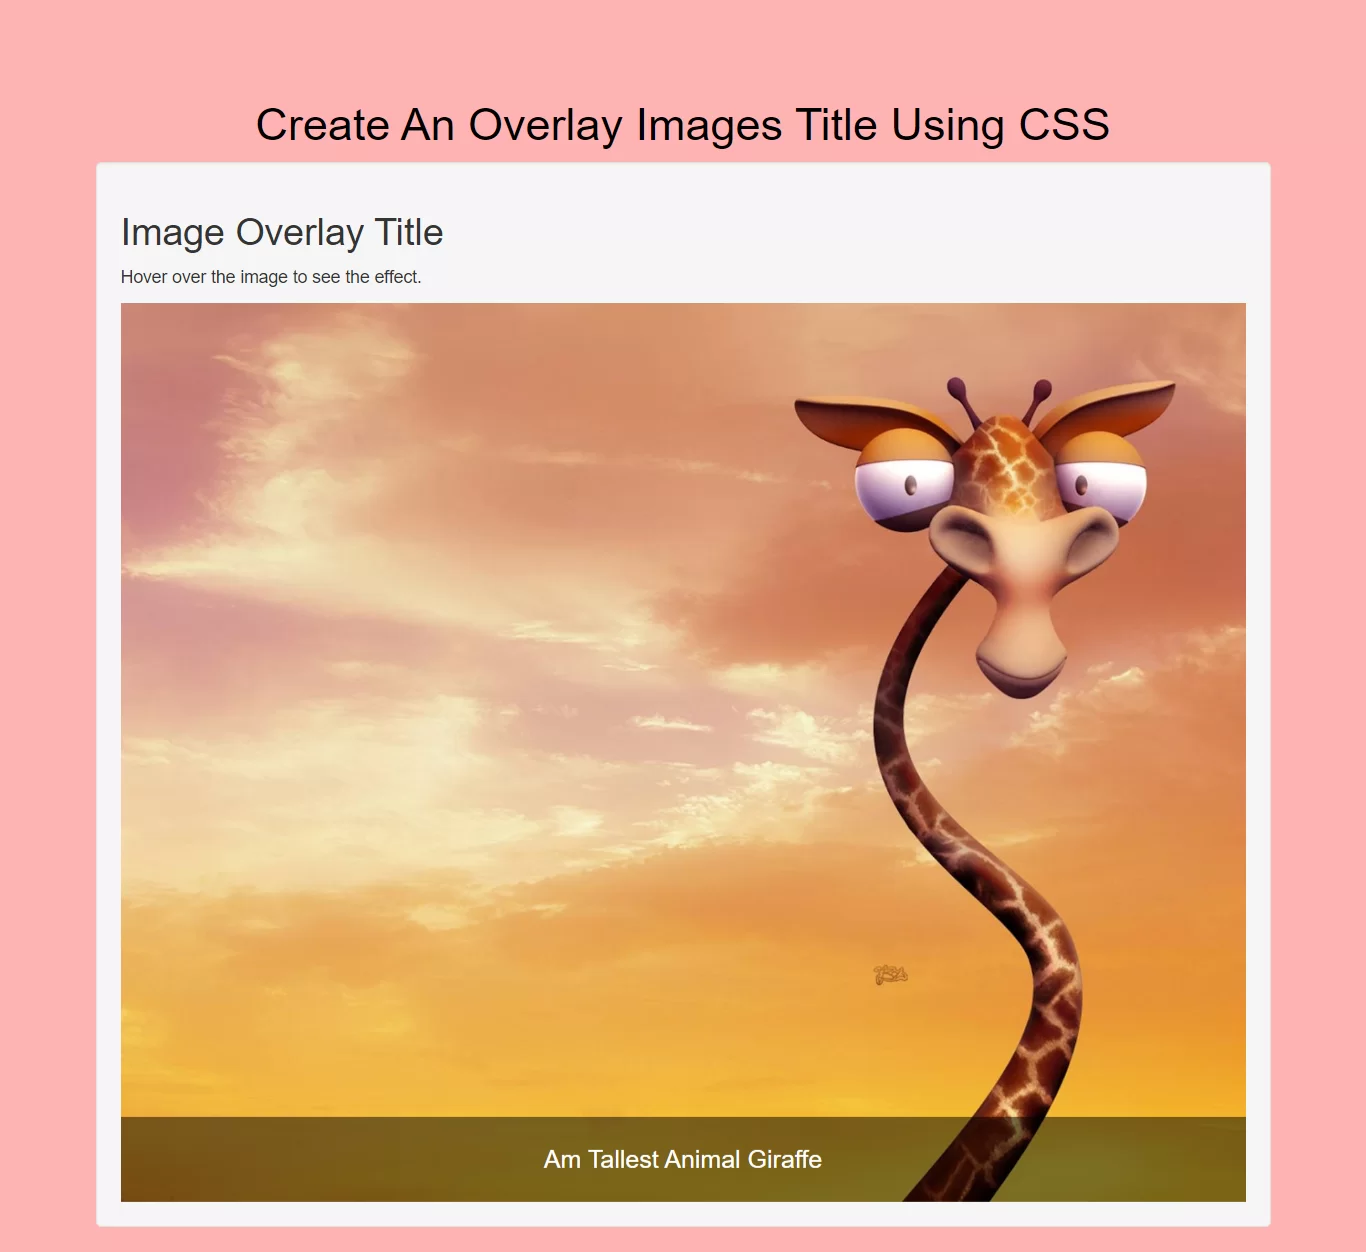 How Can I Create An Overlay Images Title Using CSS